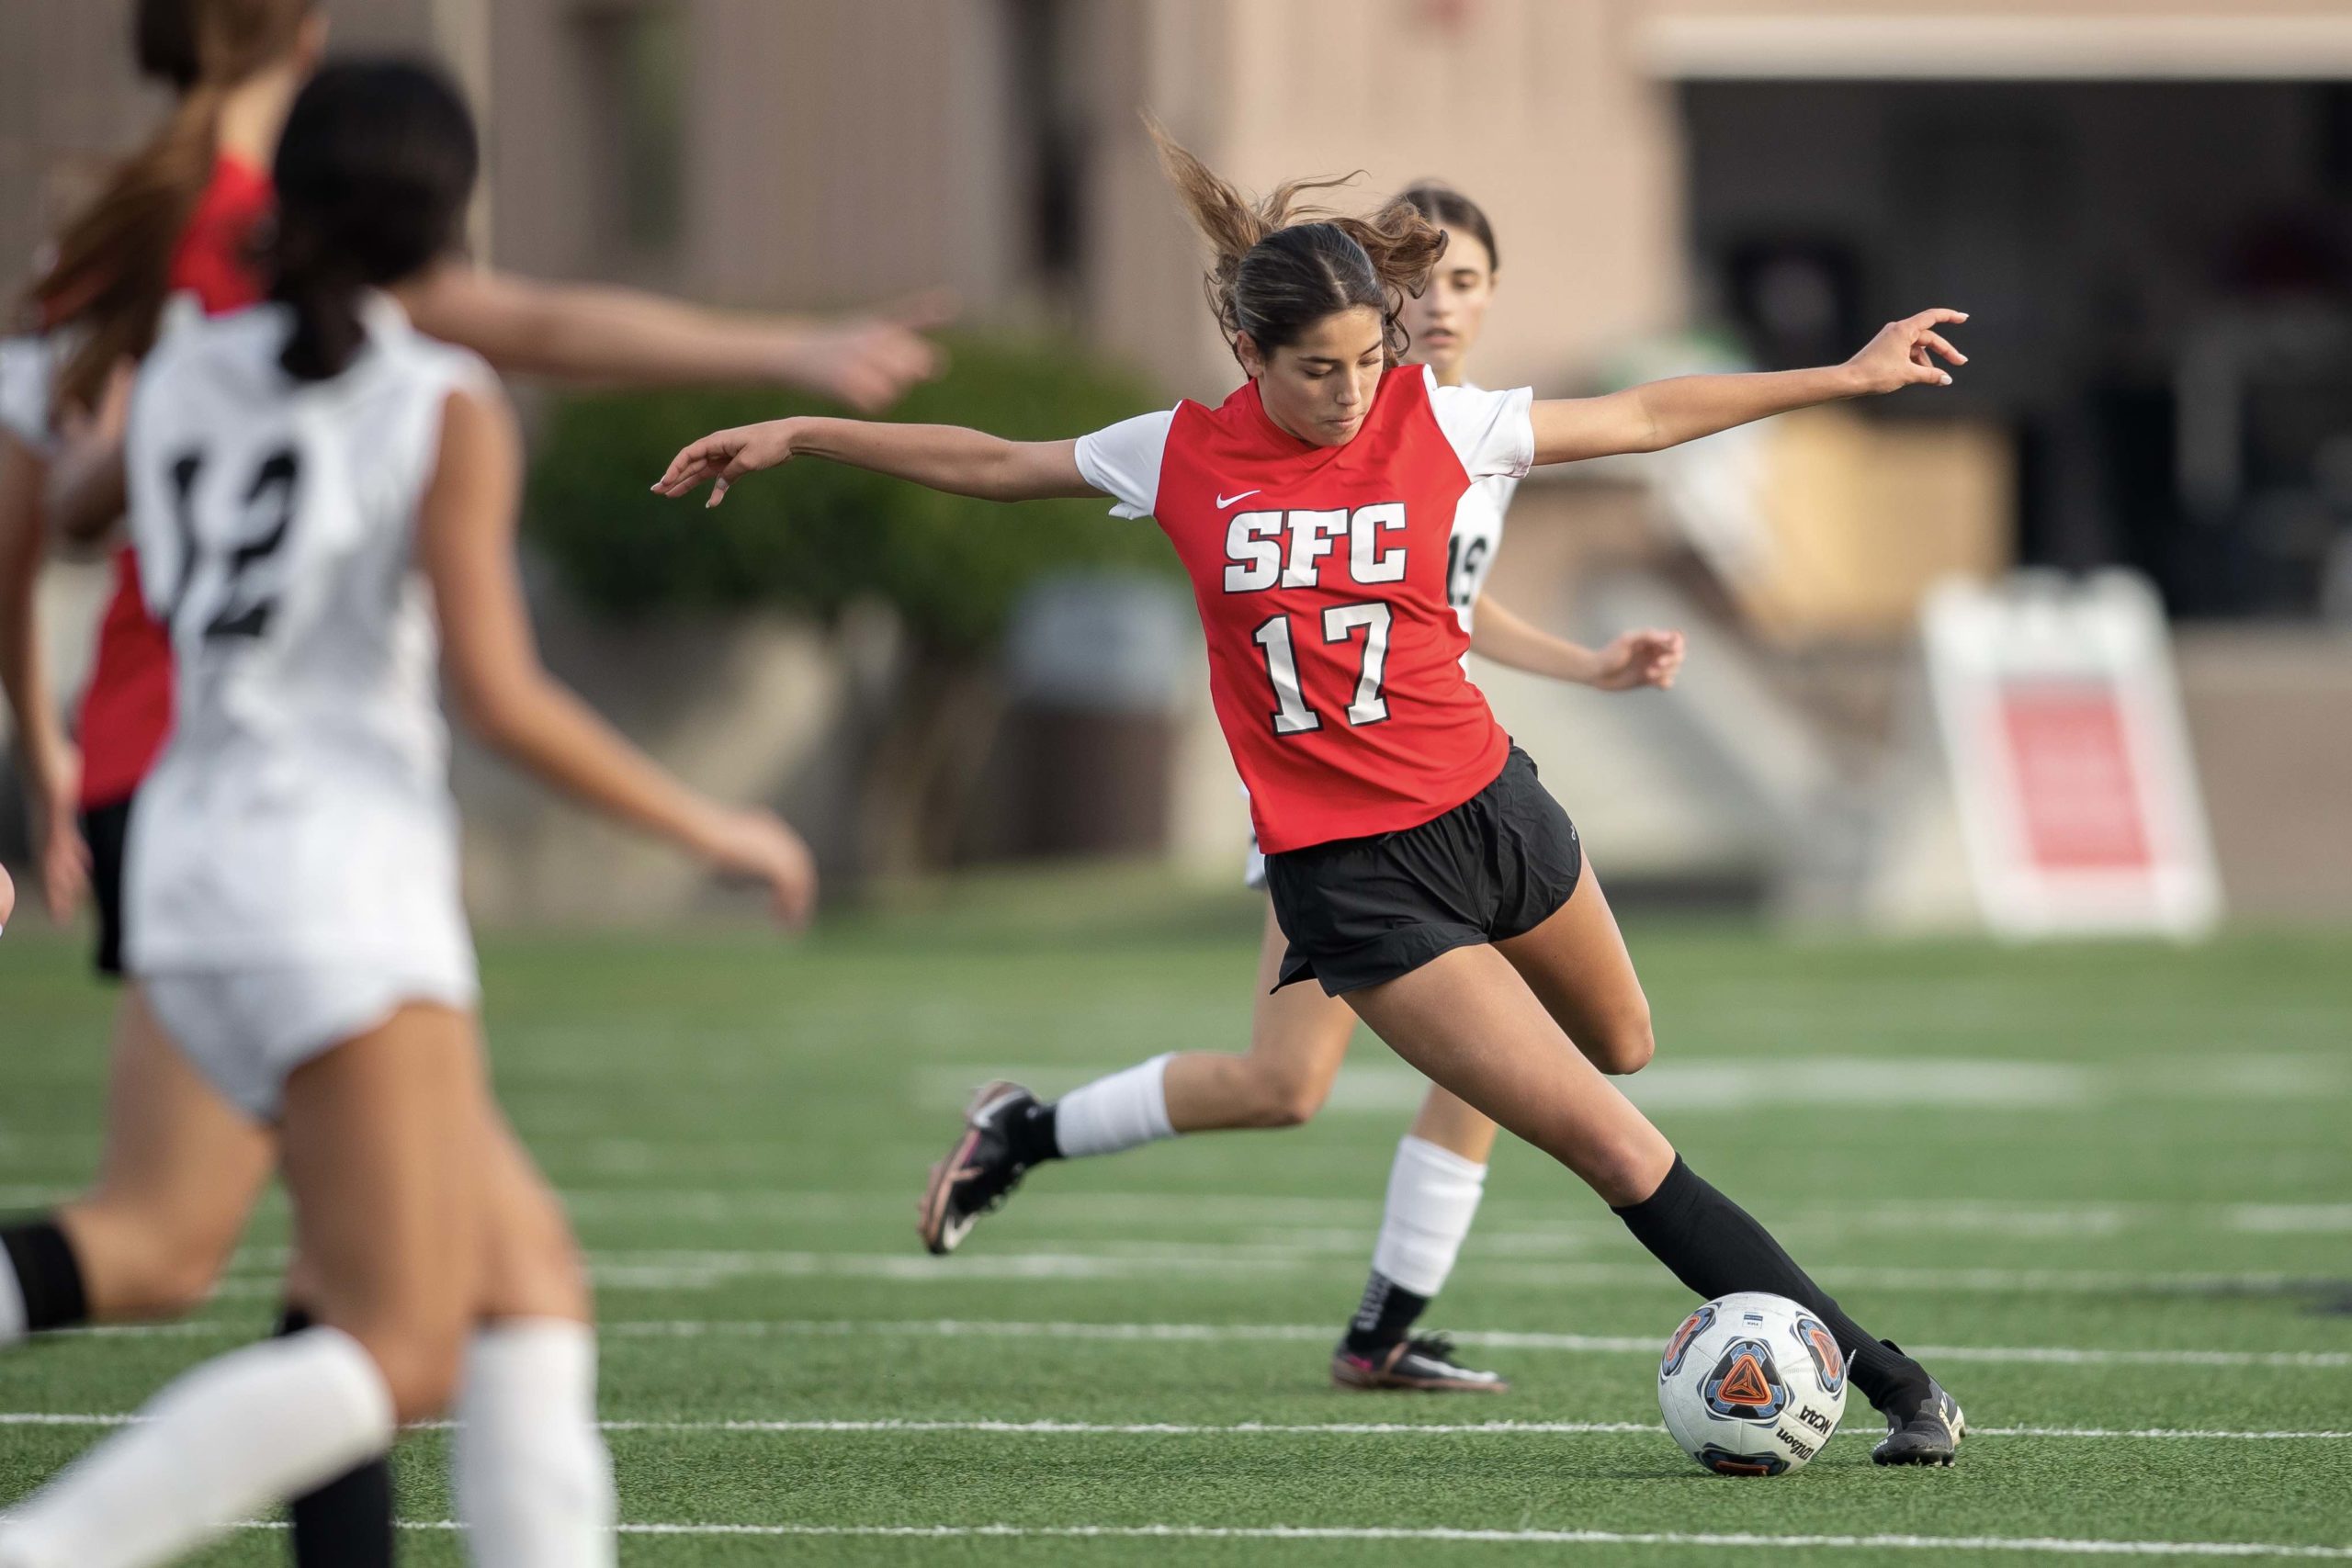 SFC womens soccer player gracefully lines up to punt a ball, mid game.